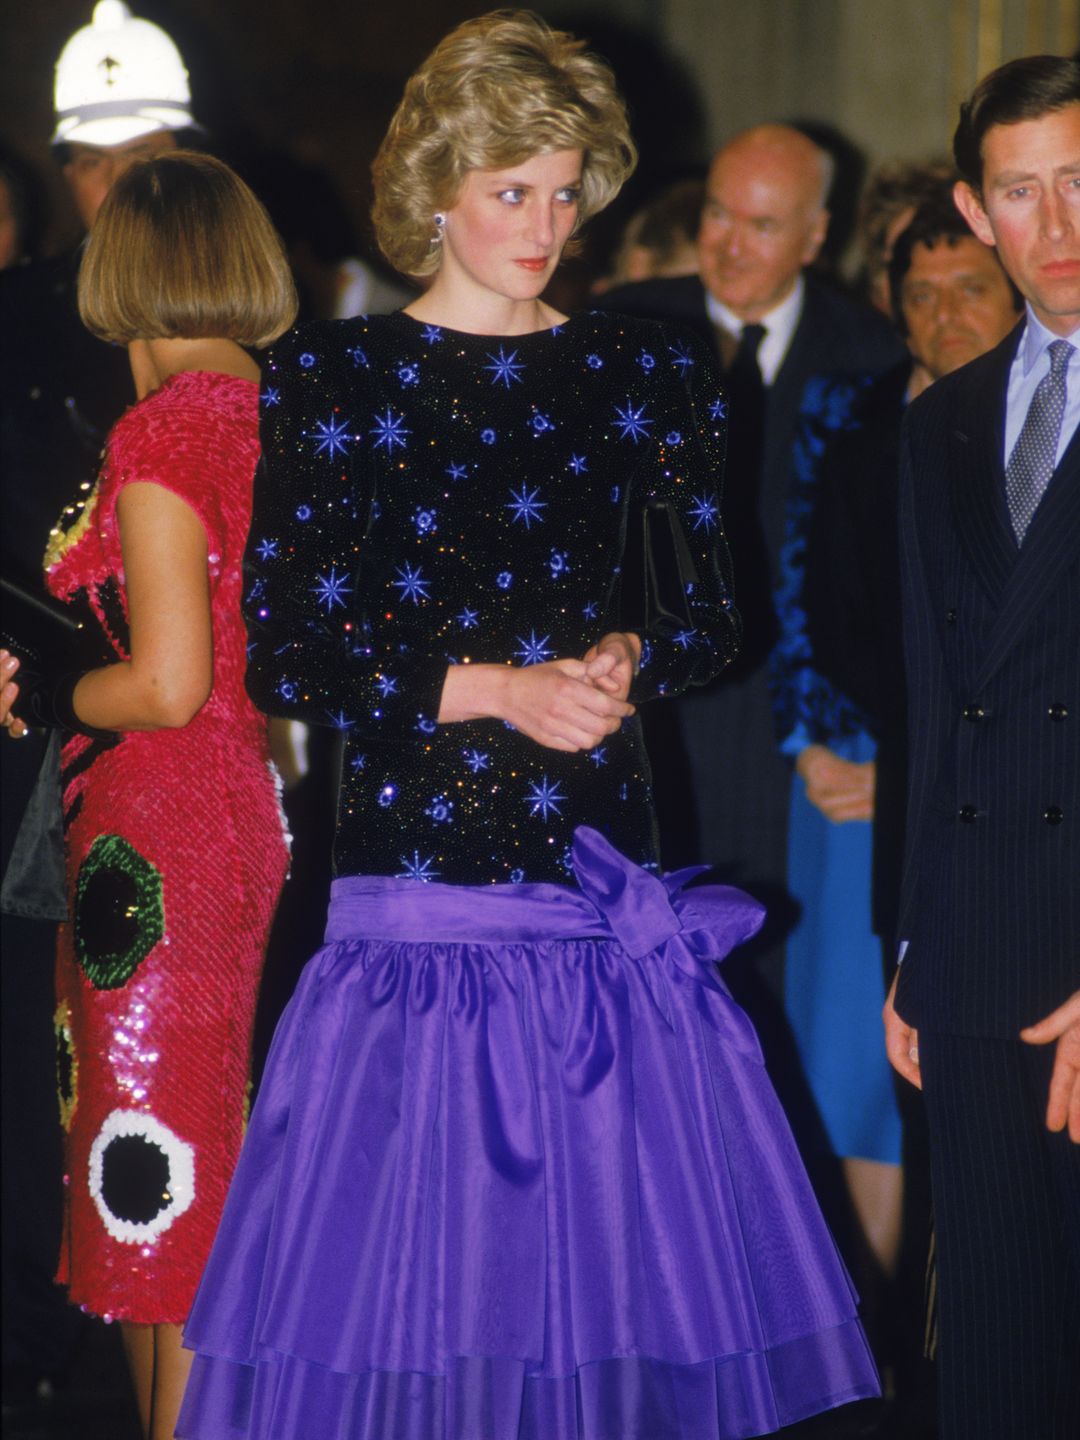 The Prince and Princess of Wales attend a dinner held by the Mayor of Florence during a tour of Italy, April 1985. The Princess wears a dress by Jacques Azagury. 